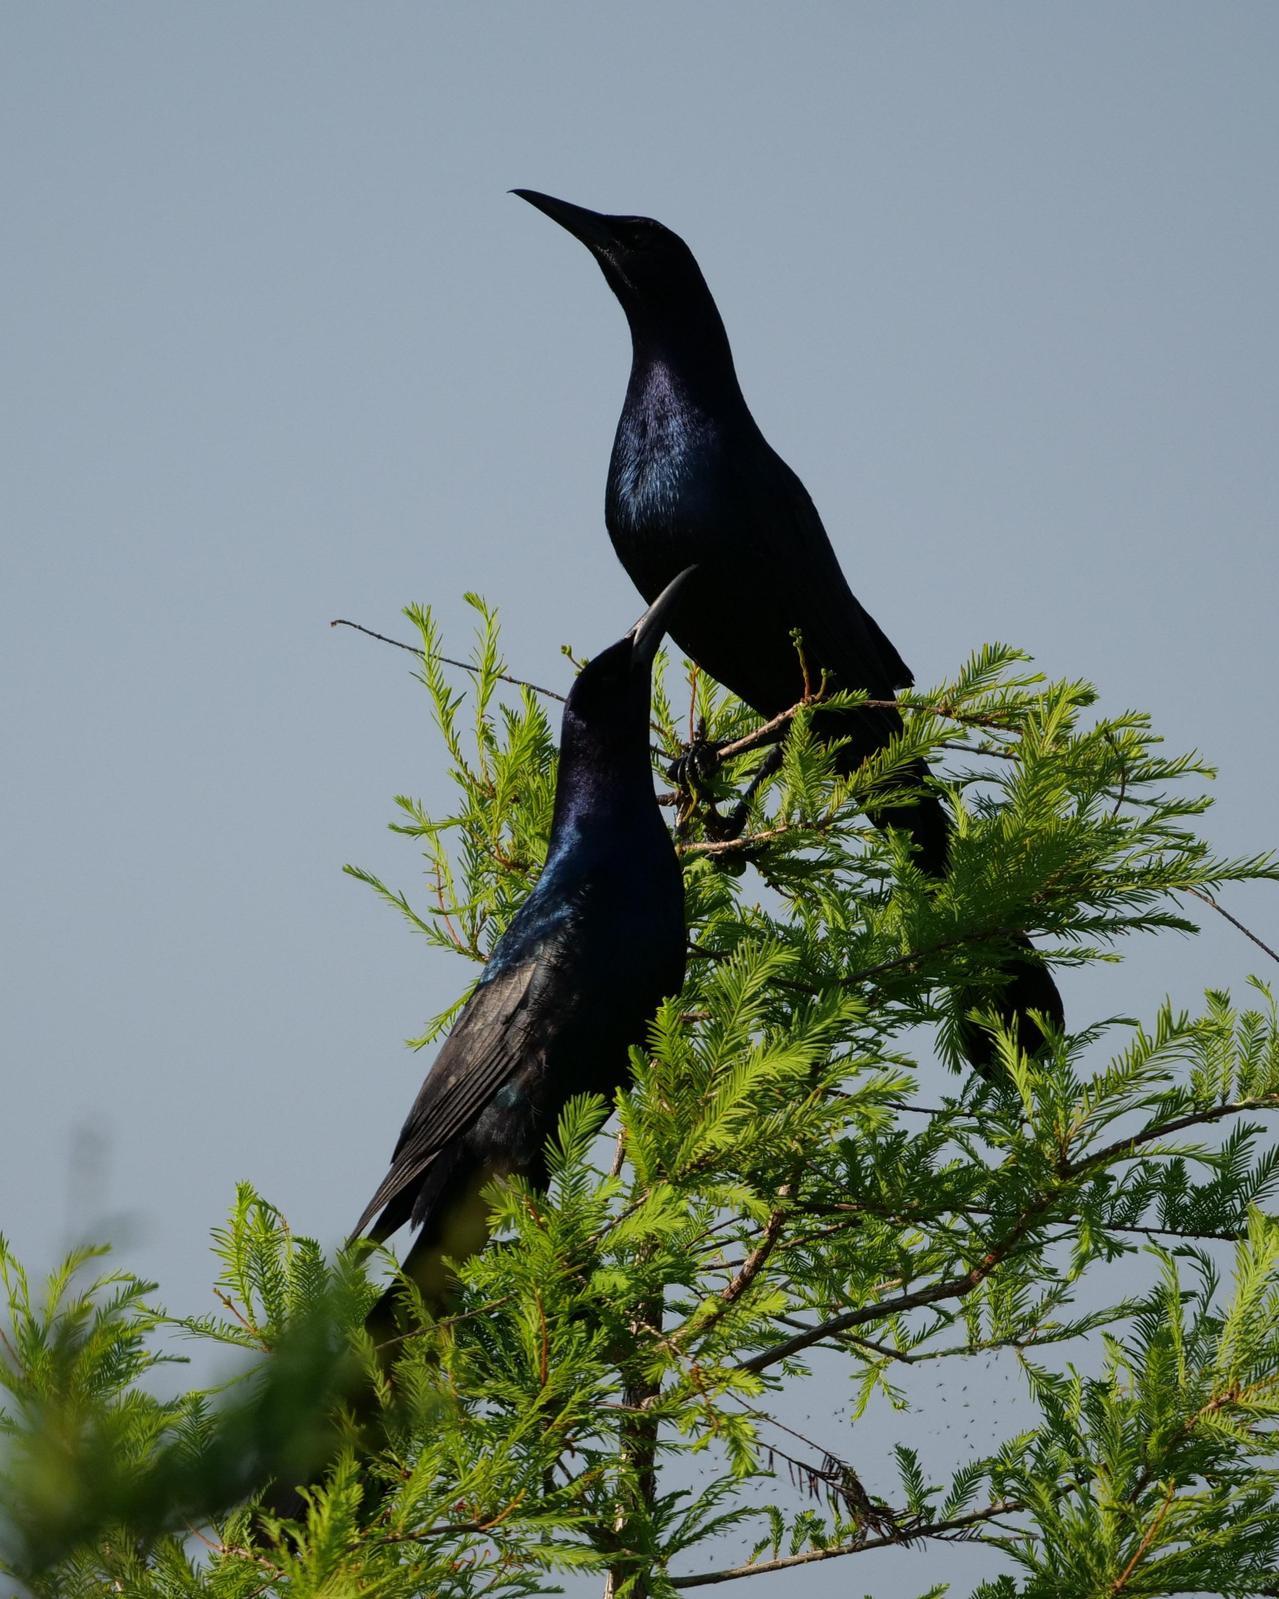 Boat-tailed Grackle Photo by Steve Percival